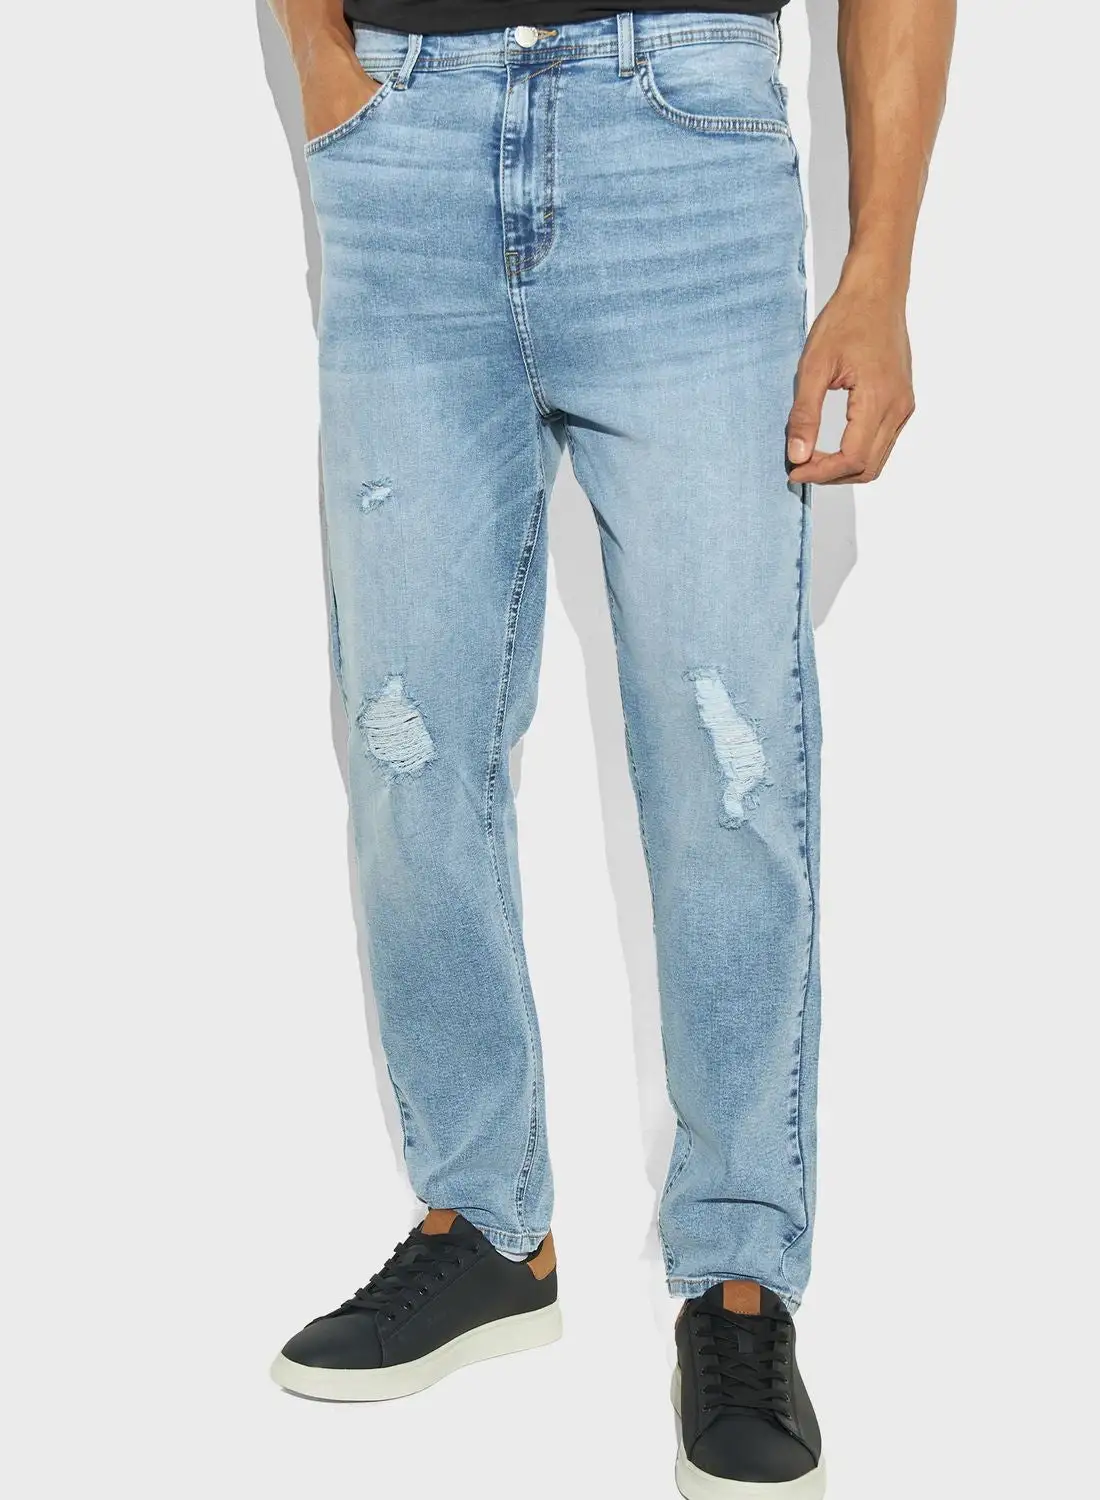 Iconic Light Wash Ripped Jeans